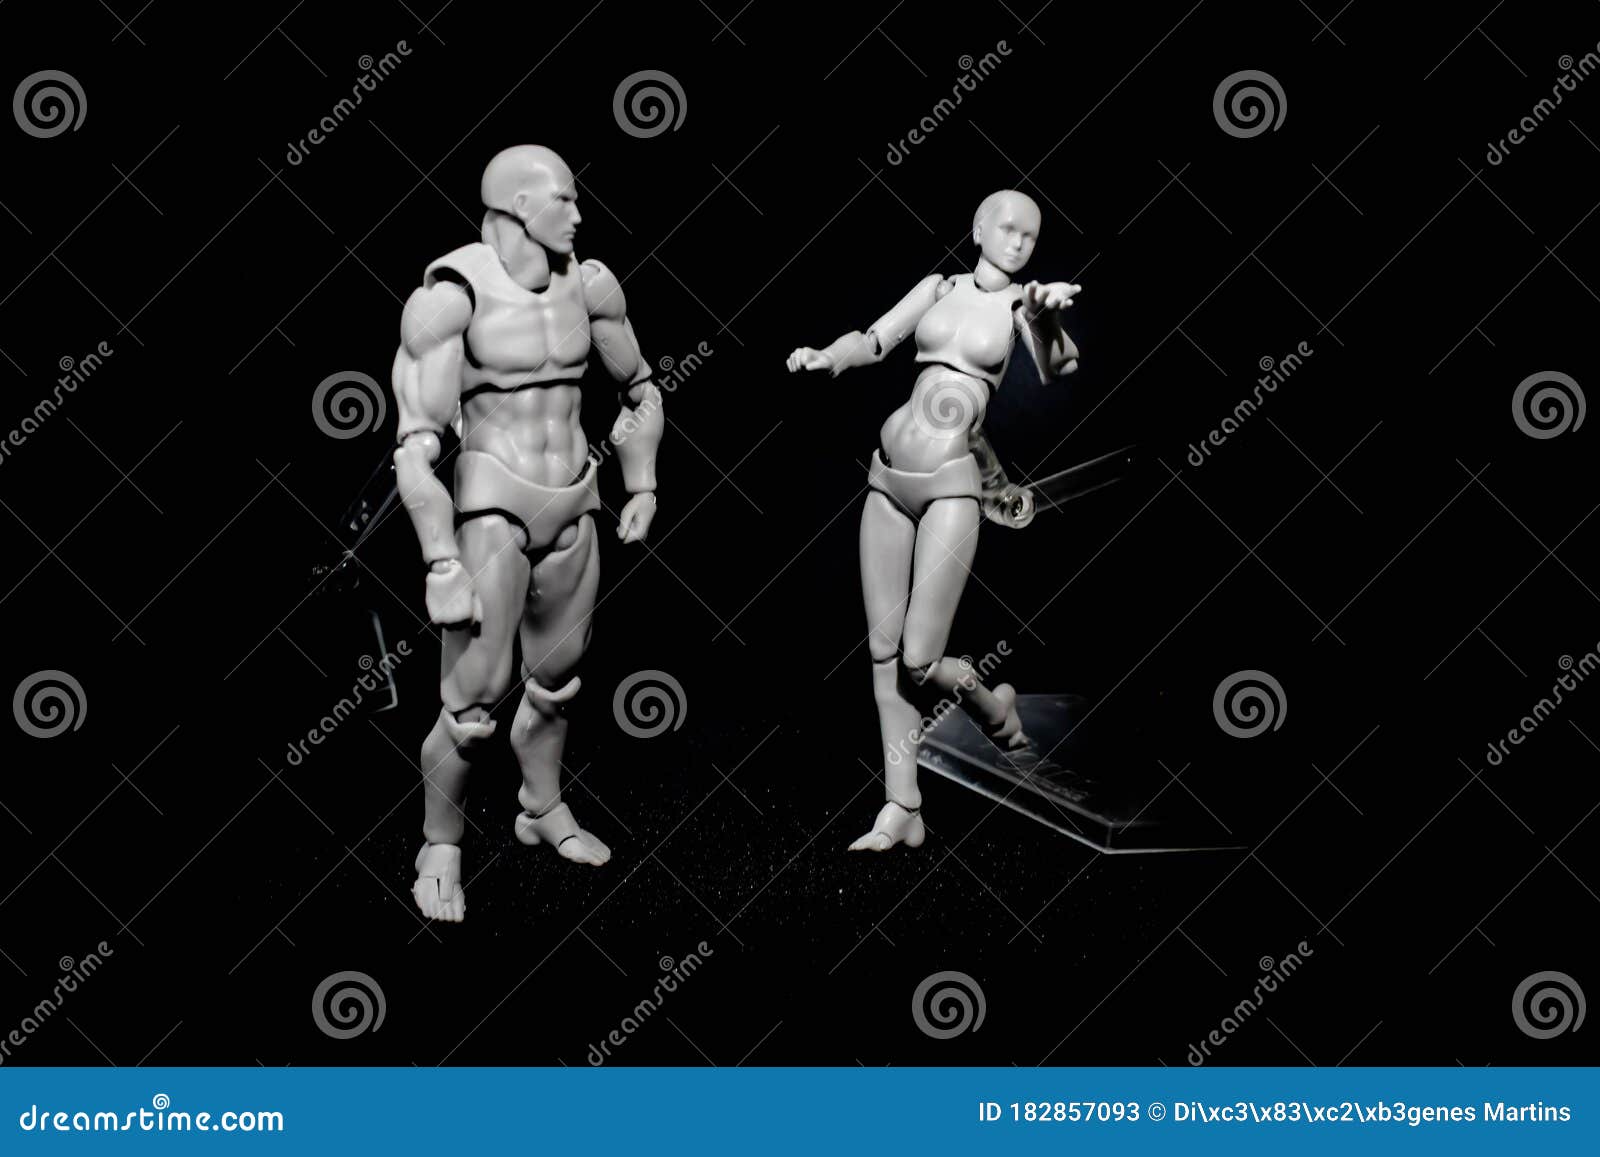 two-dolls-acting-posing-black-background-two-articulated-dolls-models-acting-posing-black-background-pose-chatting-serious-182857093.jpg